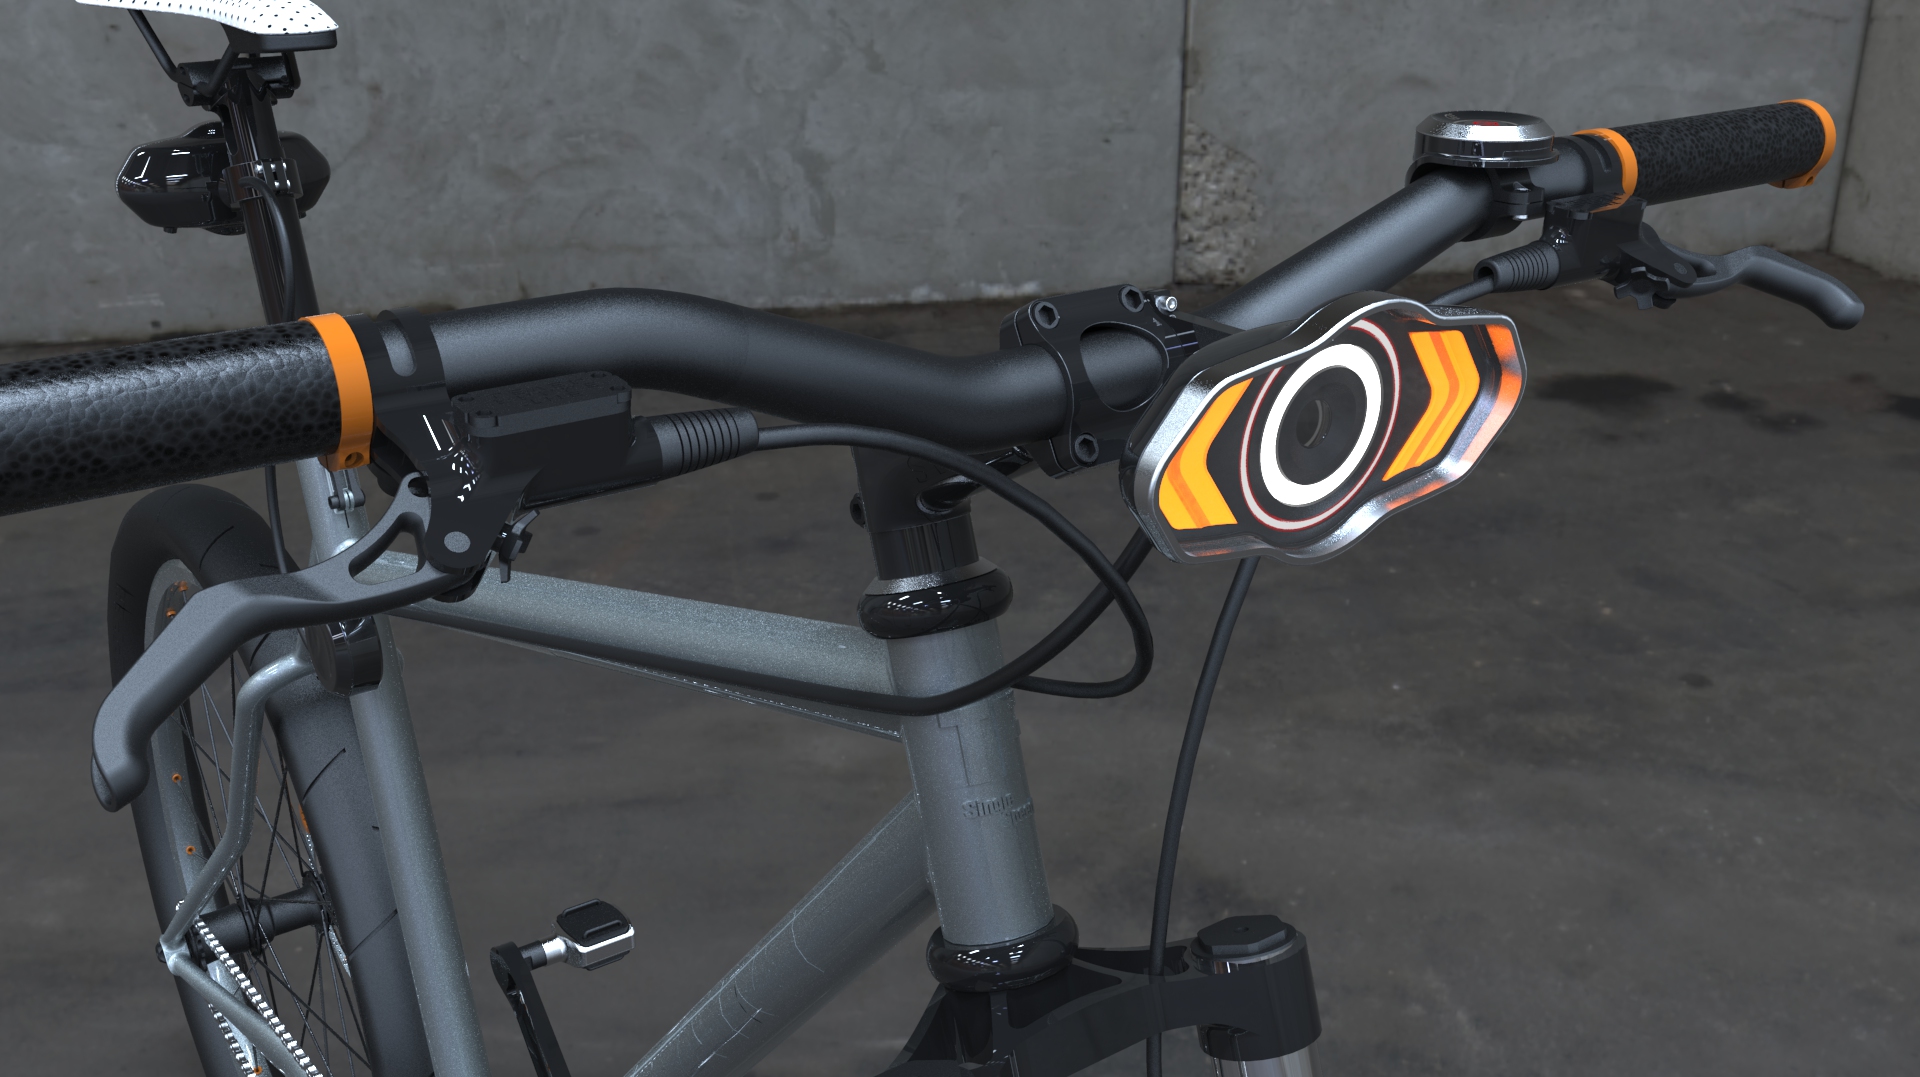 BEAKOR : An Innovation In The Cycling World!